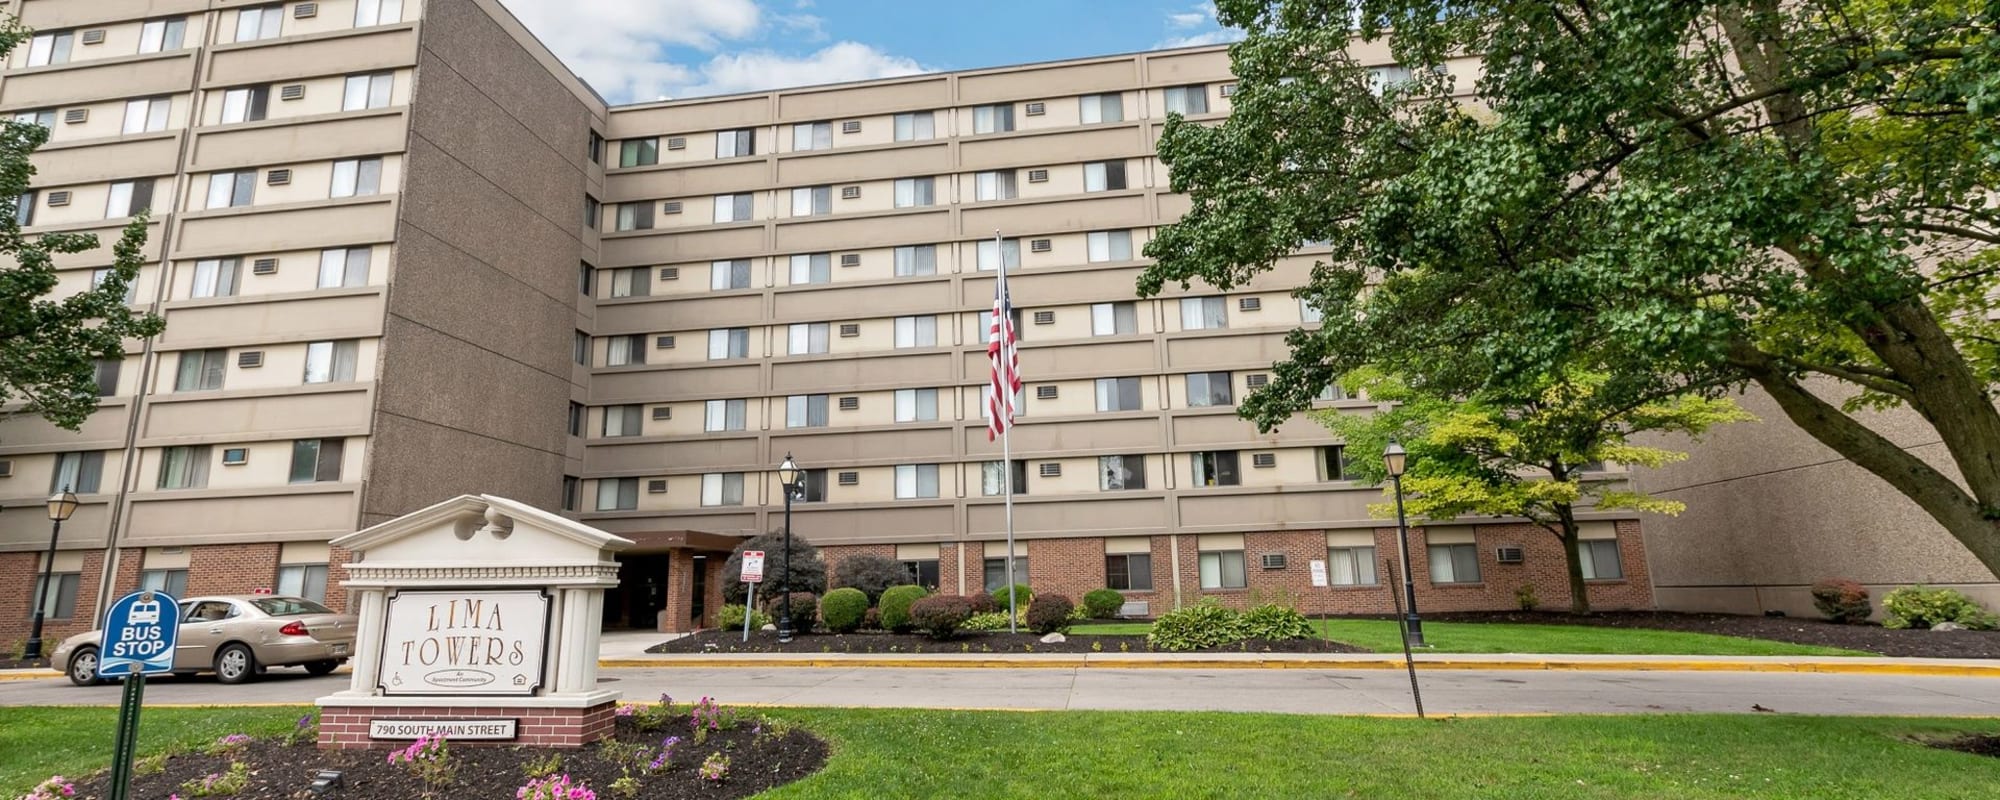 Apartments at Lima Towers in Lima, Ohio